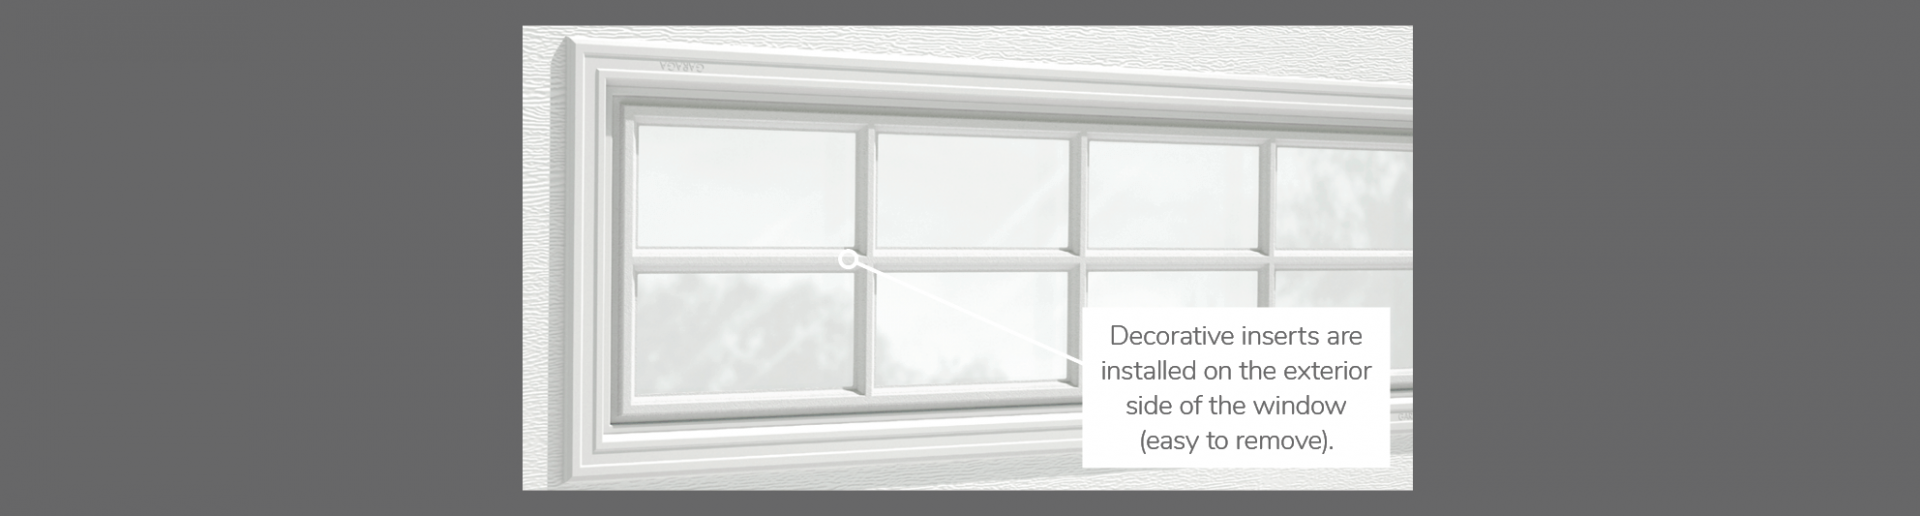 Stockton Decorative Insert, 40" x 13" or 41" x 16", available for door R-16, 3 layers - Polystyrene,  2 layers - Polystyrene and Non-insulated